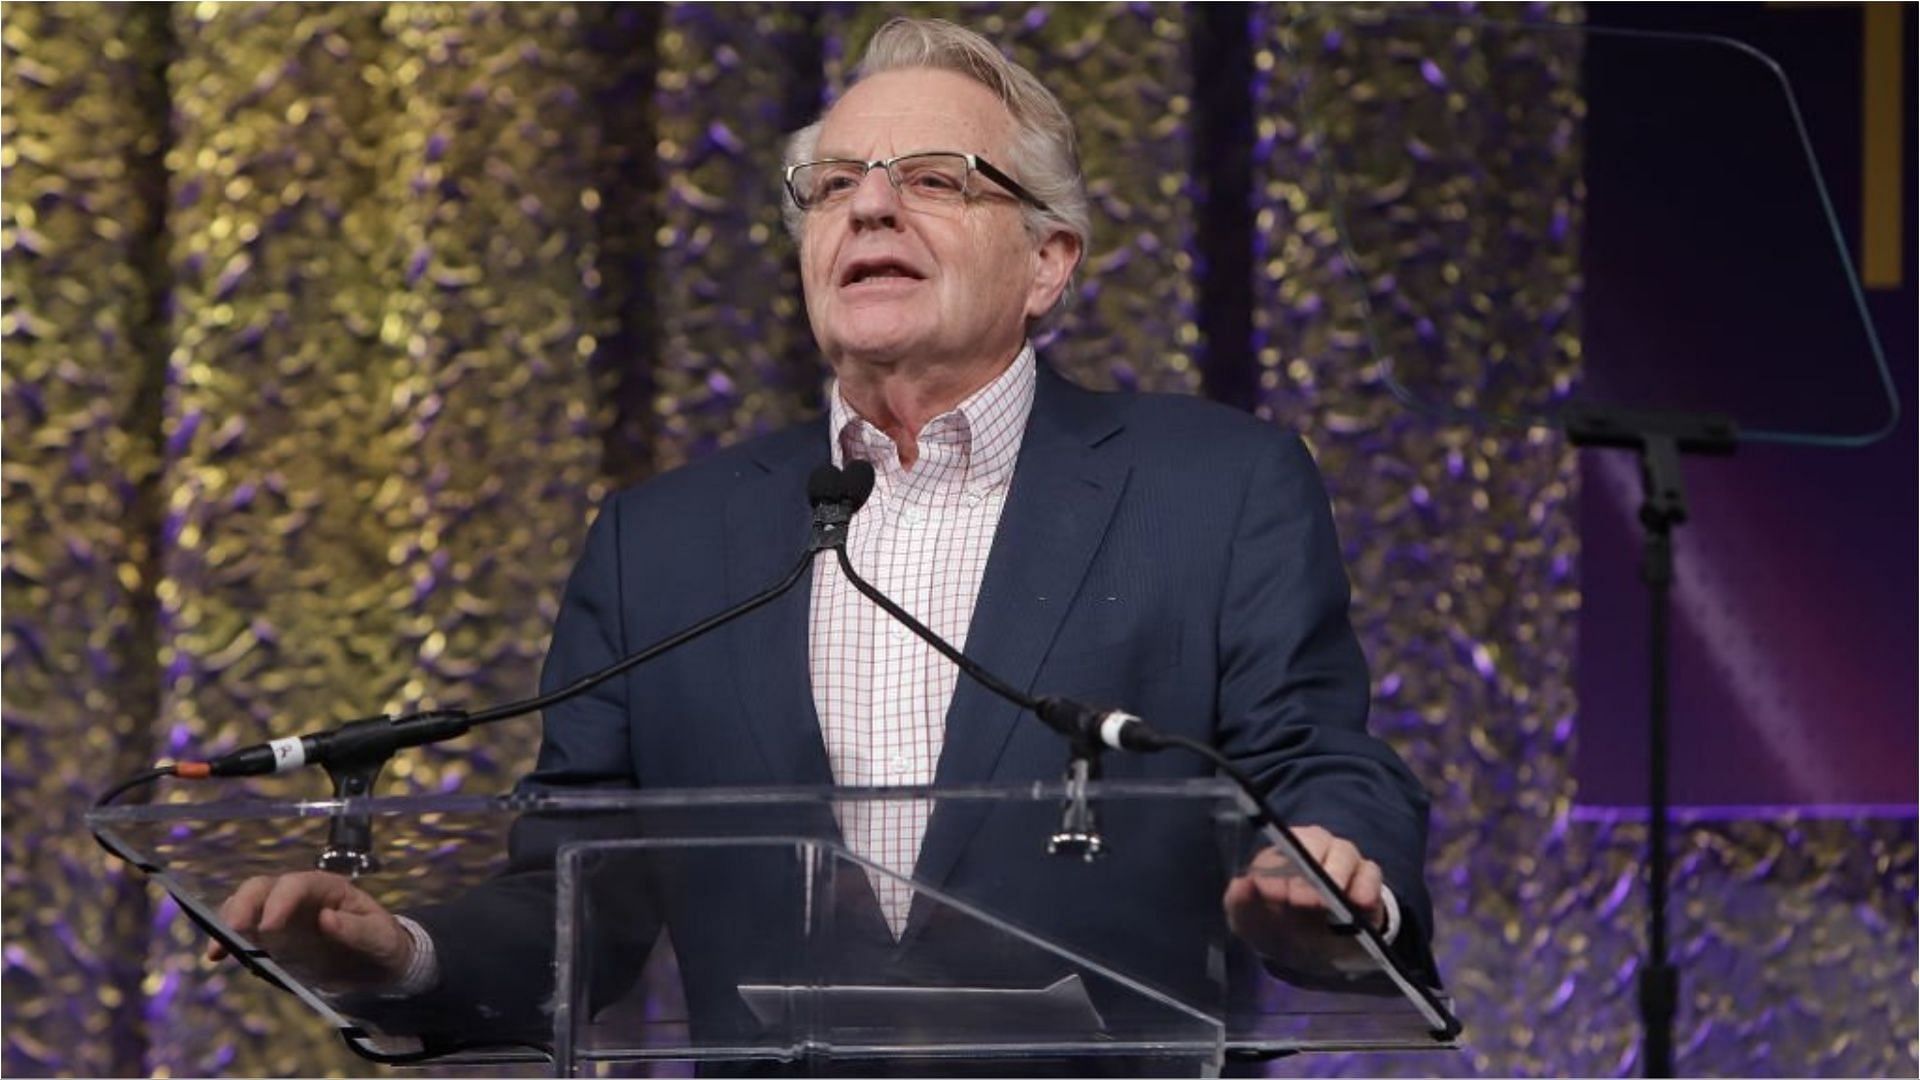 Jerry Springer started his career in law and appeared in many films and TV shows (Image via John Parra/Getty Images)